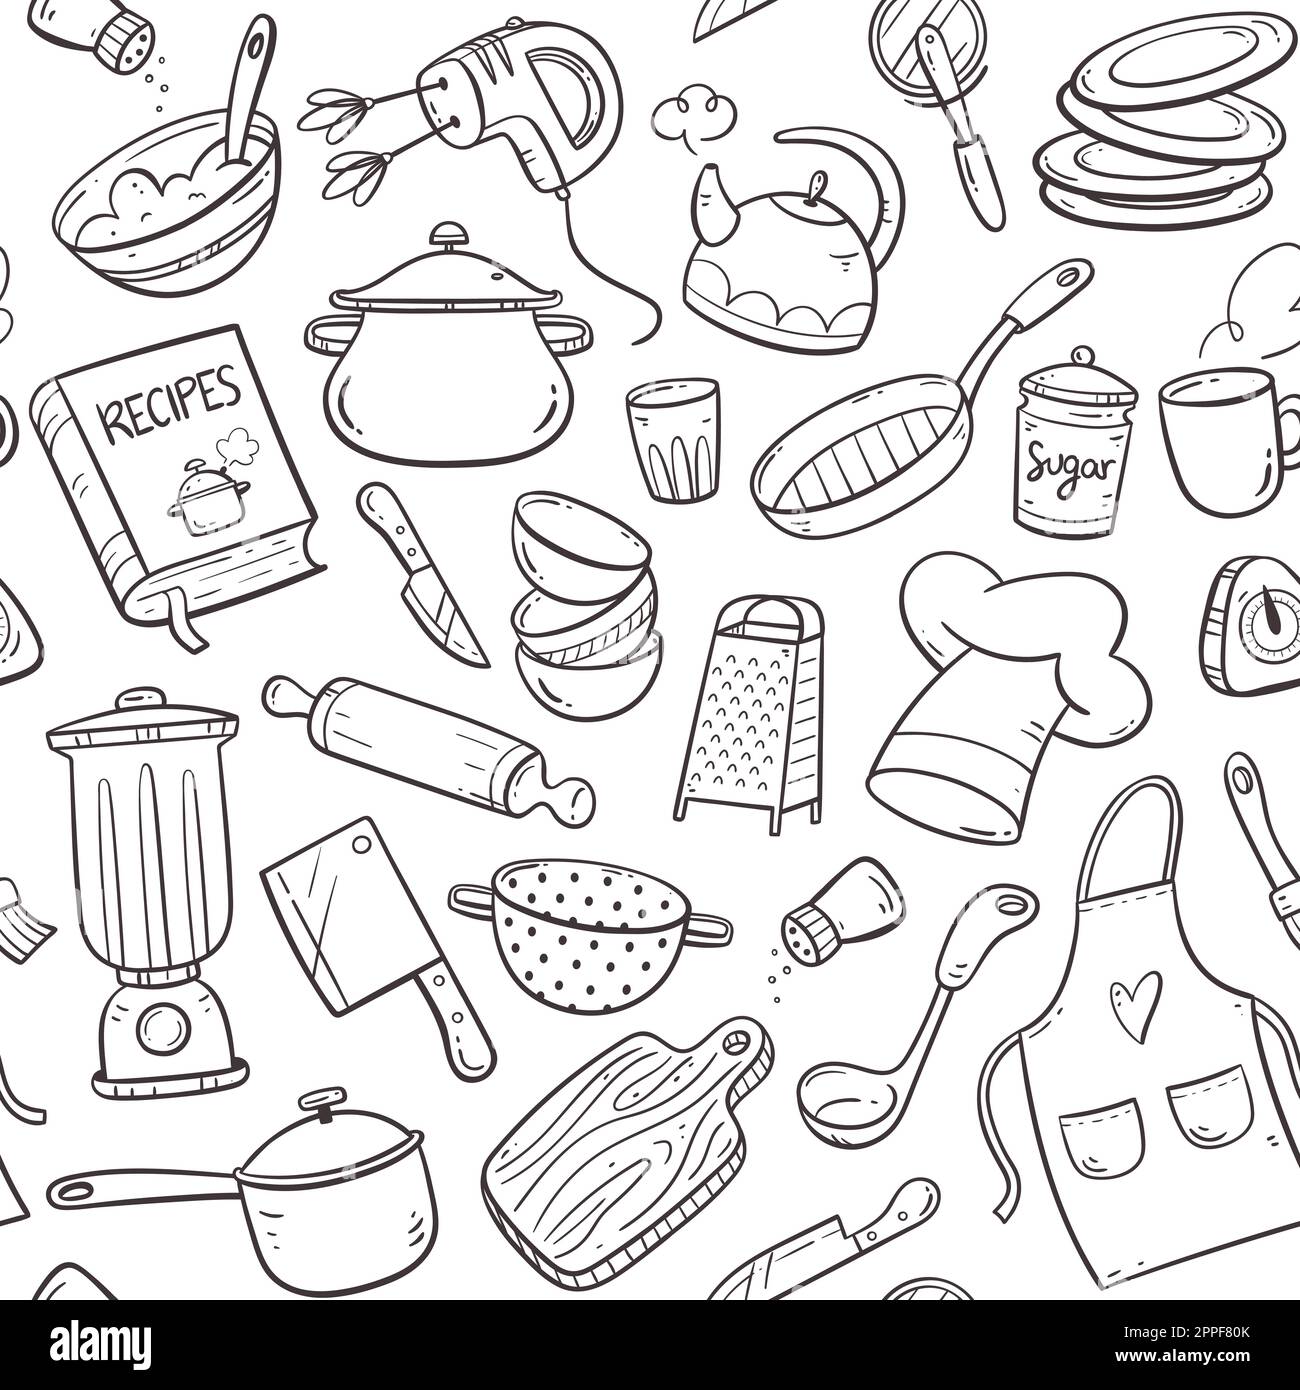 Kitchen tools and appliances doodle seamless pattern. Cute illustration with isolated cooking objects in vector format. Kitchen utensils background. Stock Vector